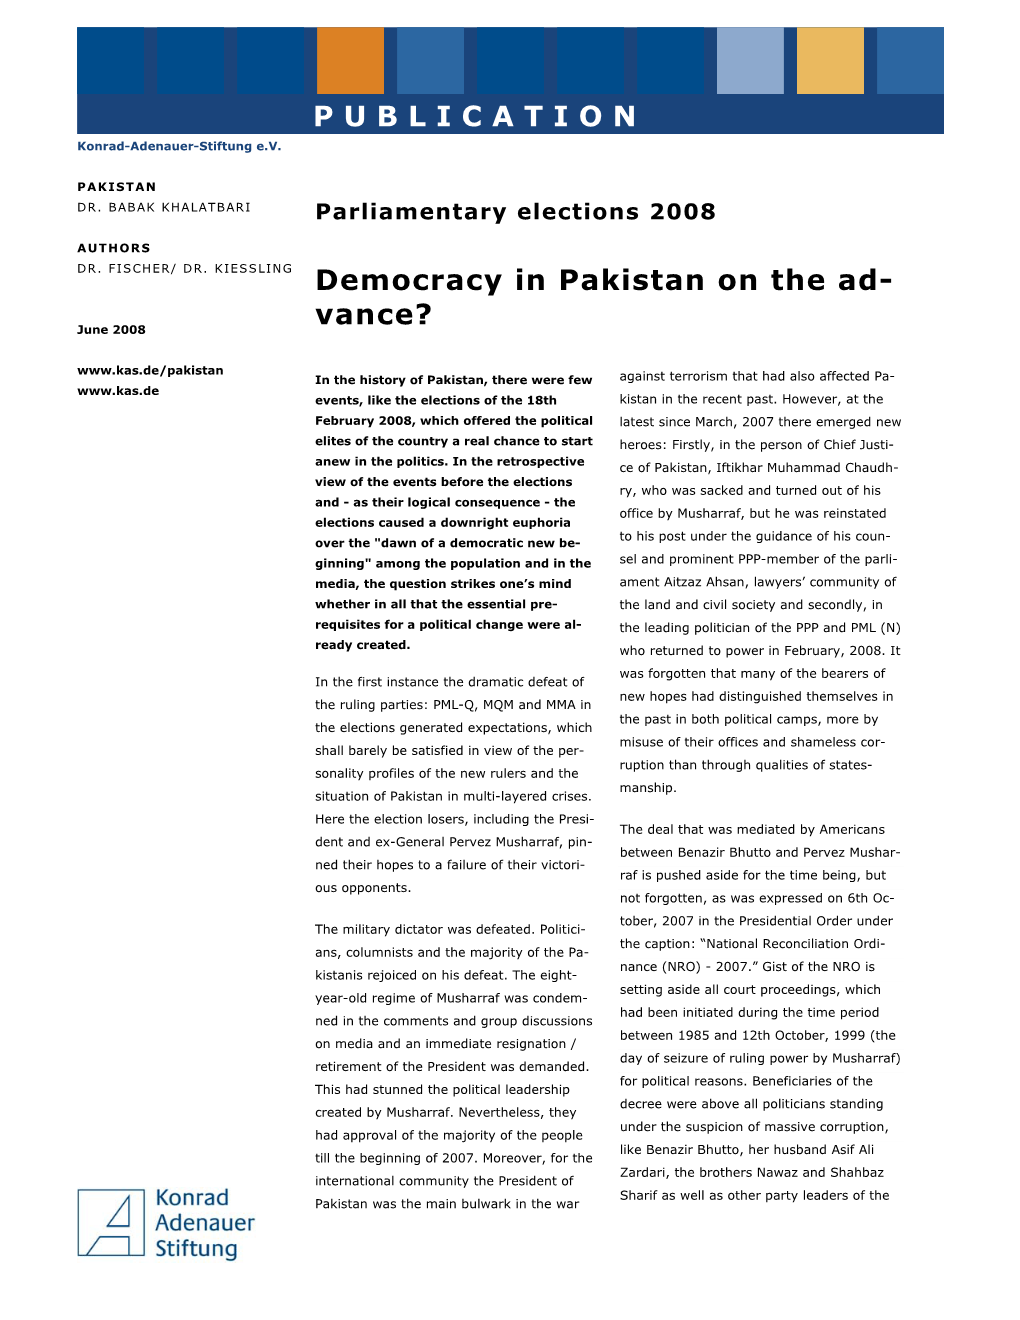 PUBLICATION Democracy in Pakistan on the Ad